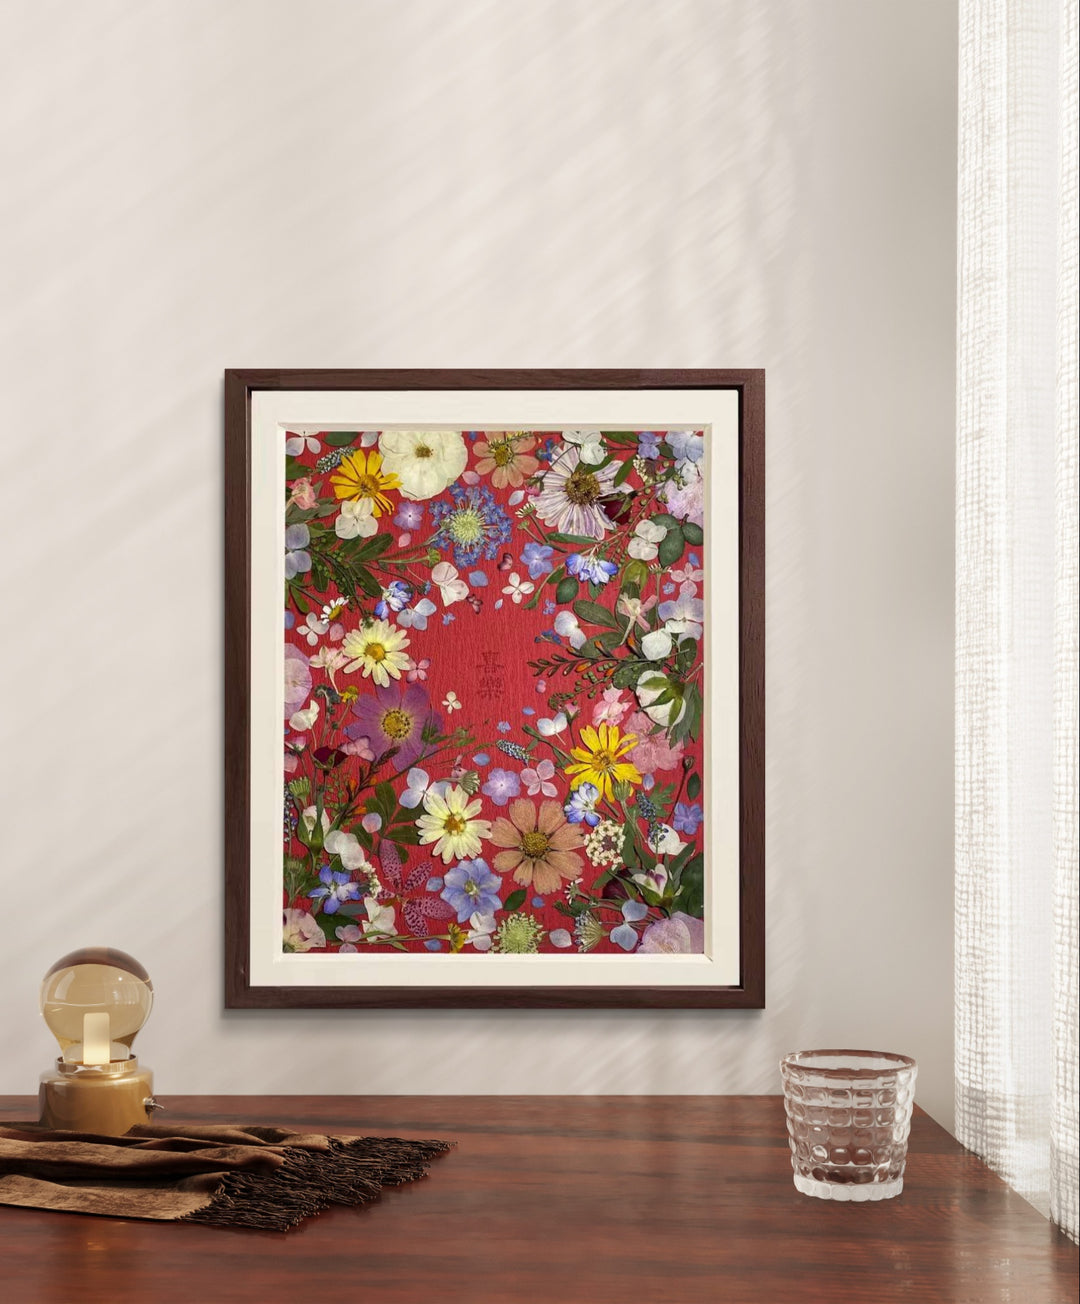 Passionate love theme 11 inches width 12.5 inches height pressed flower frame art hanging on the wall. 